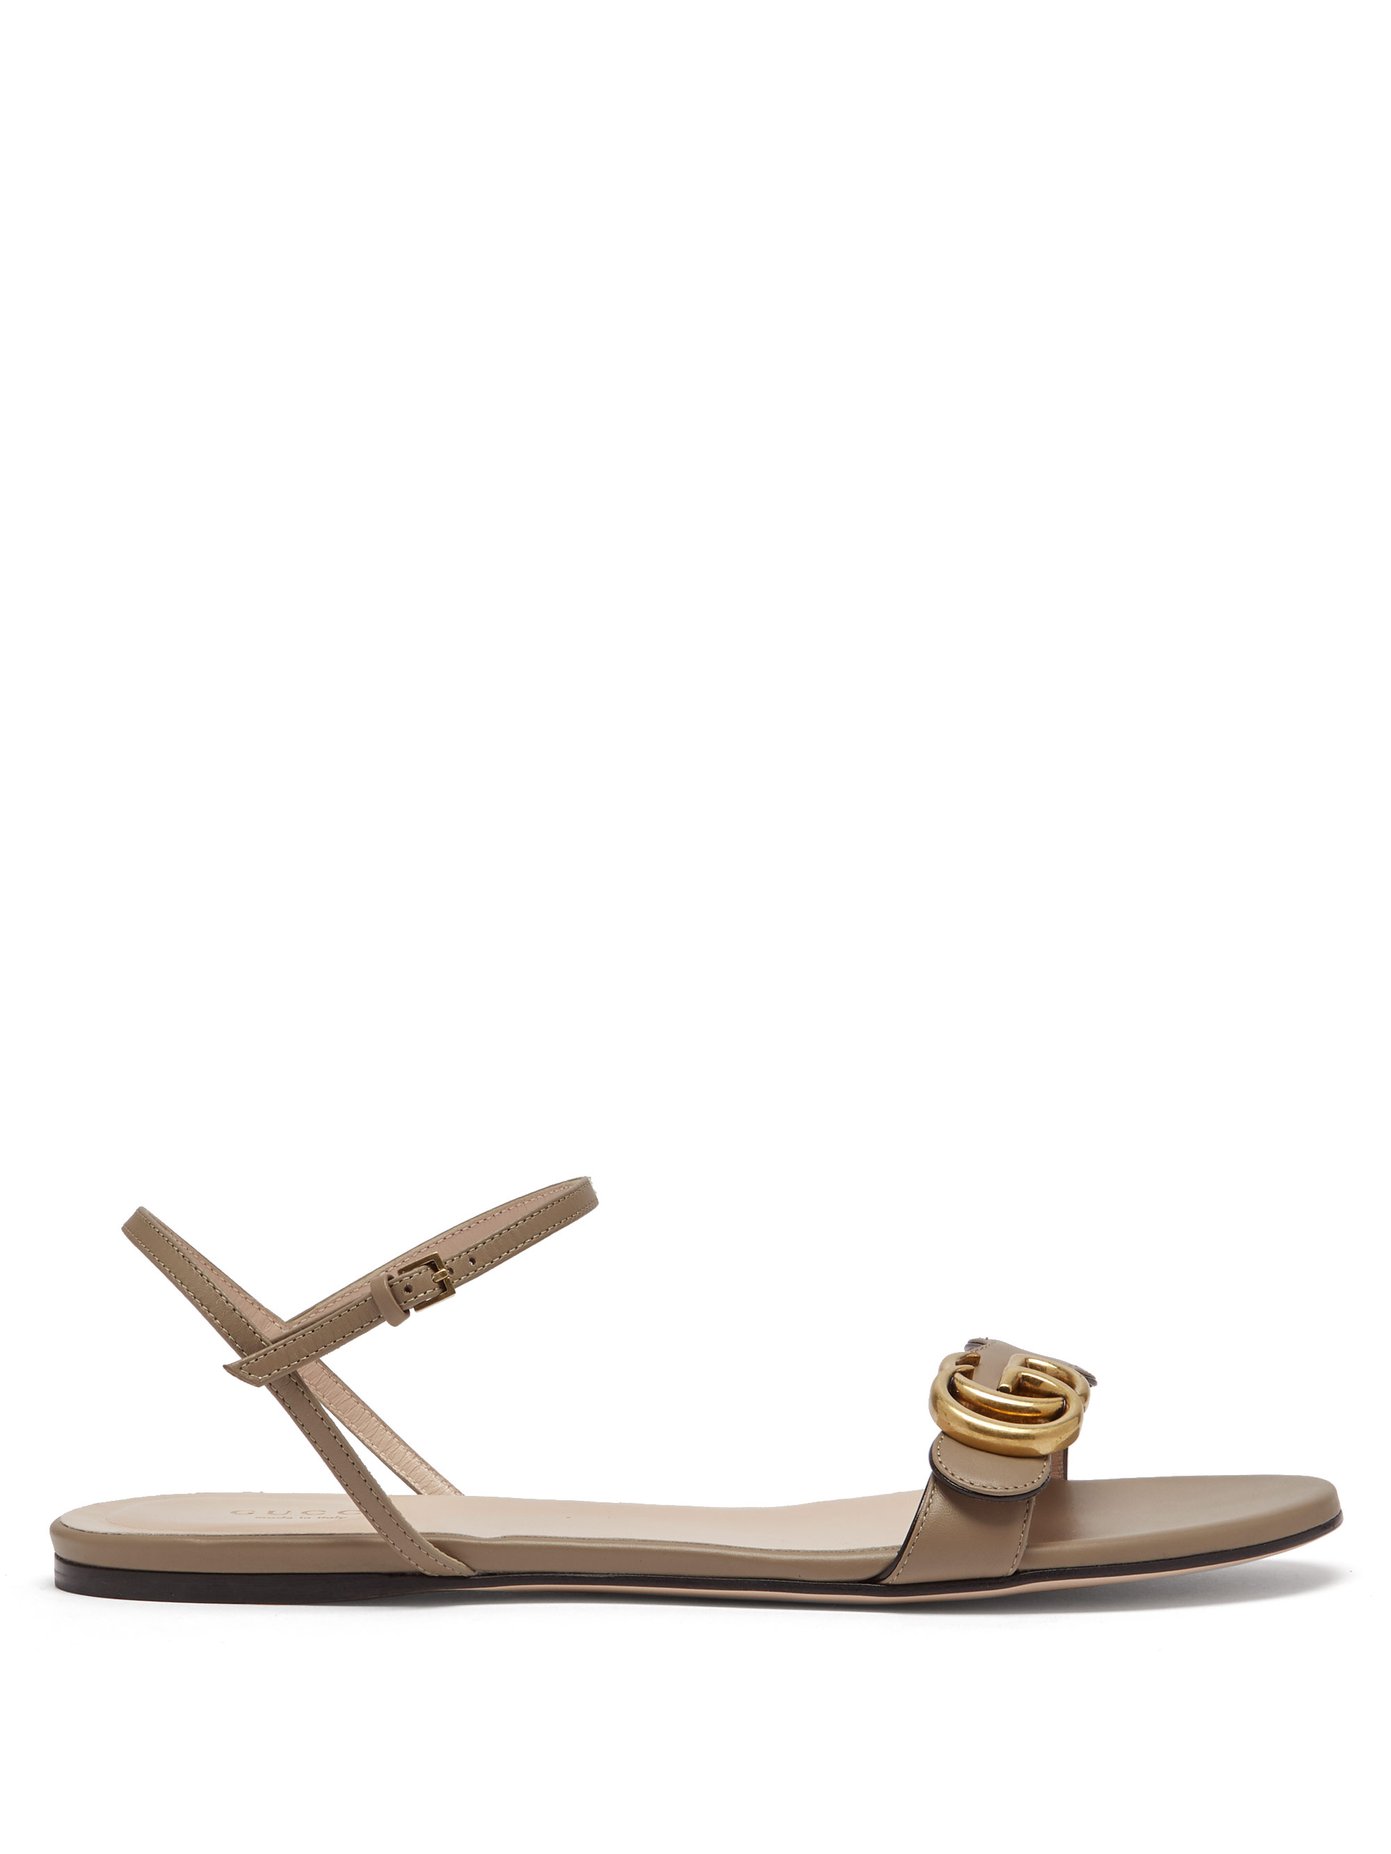 GG Marmont leather sandals | Gucci 